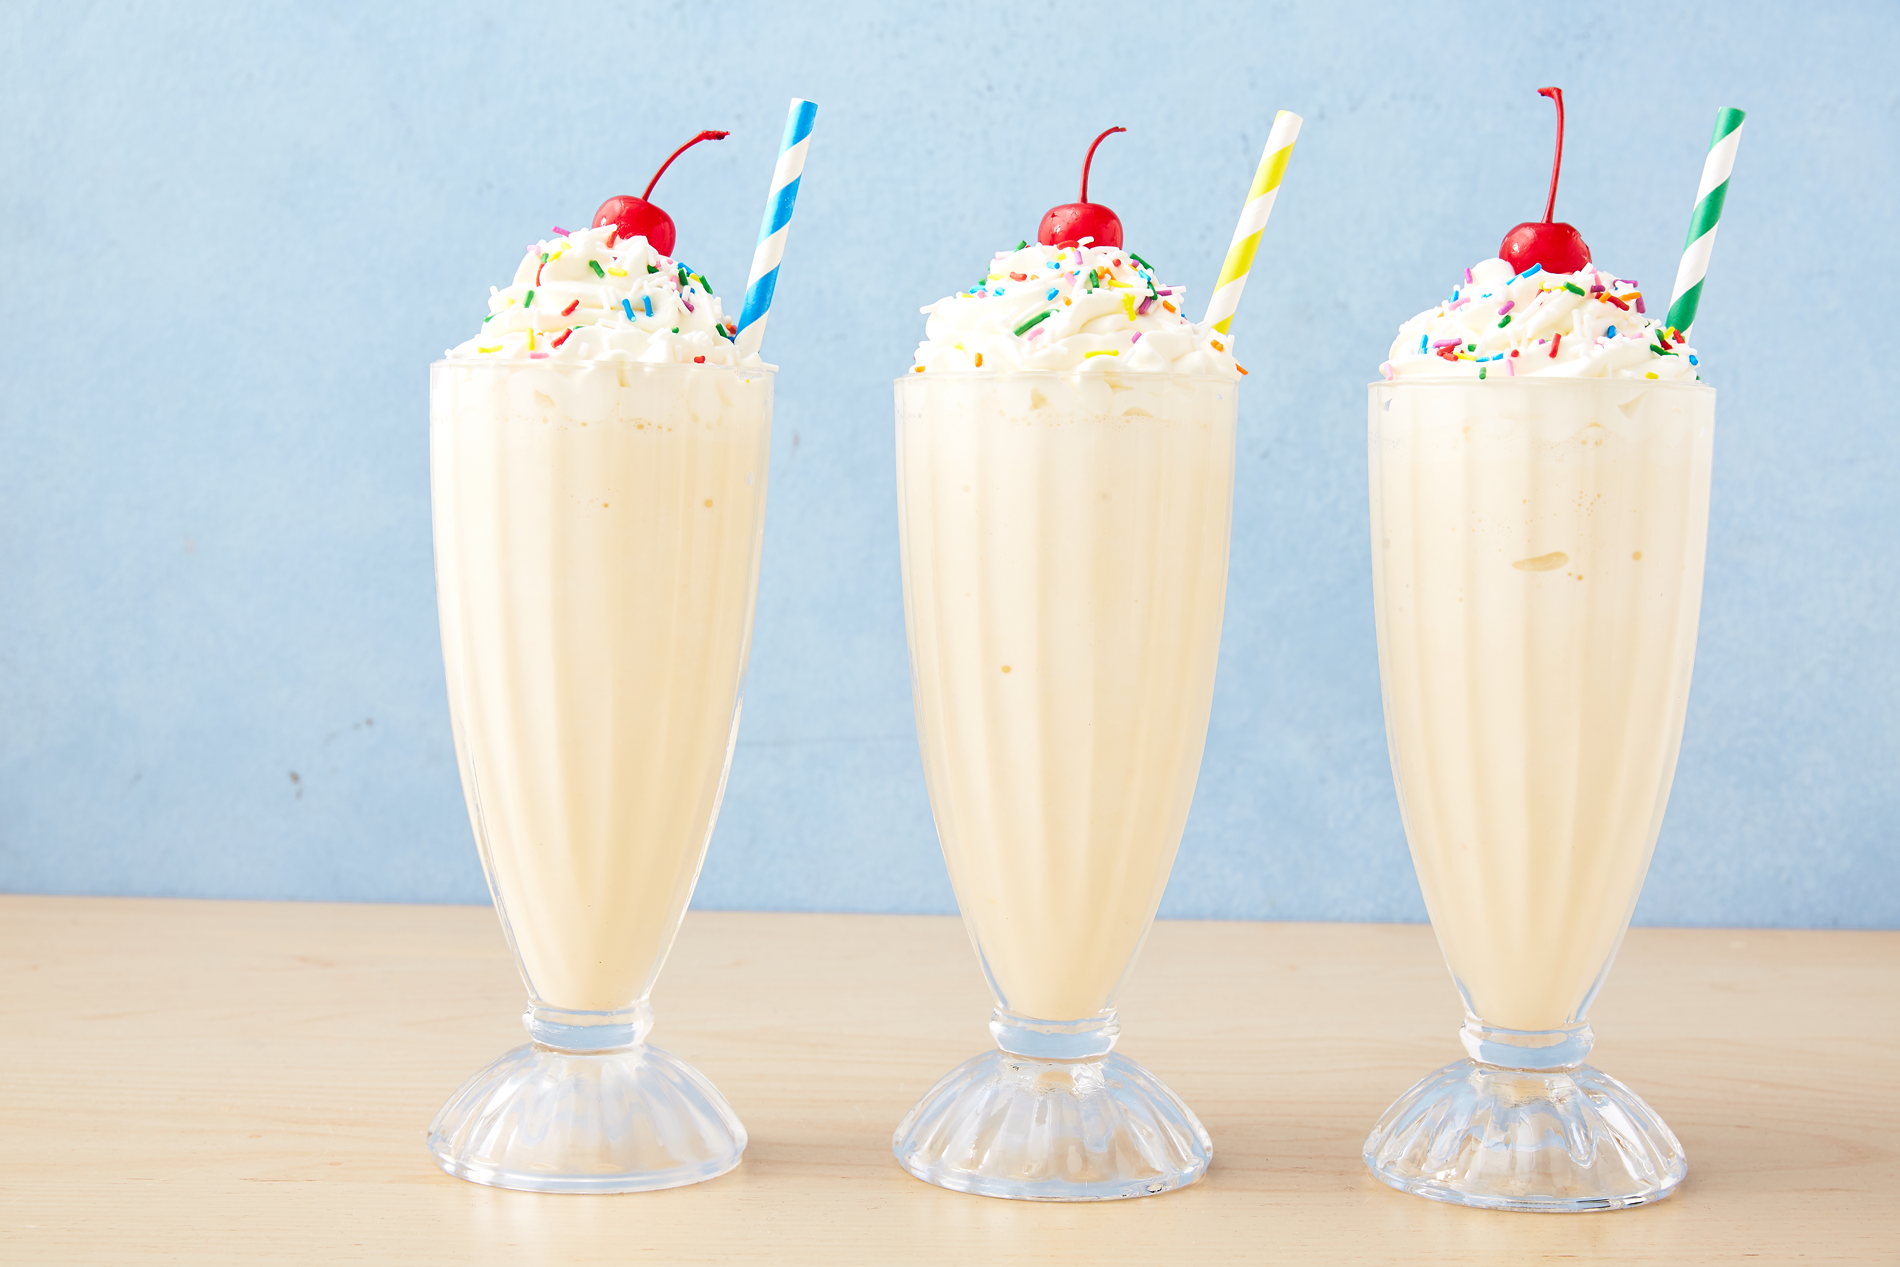 Easy Milkshake Recipe How To Make Milkshake,How To Sharpen A Knife With Another Knife